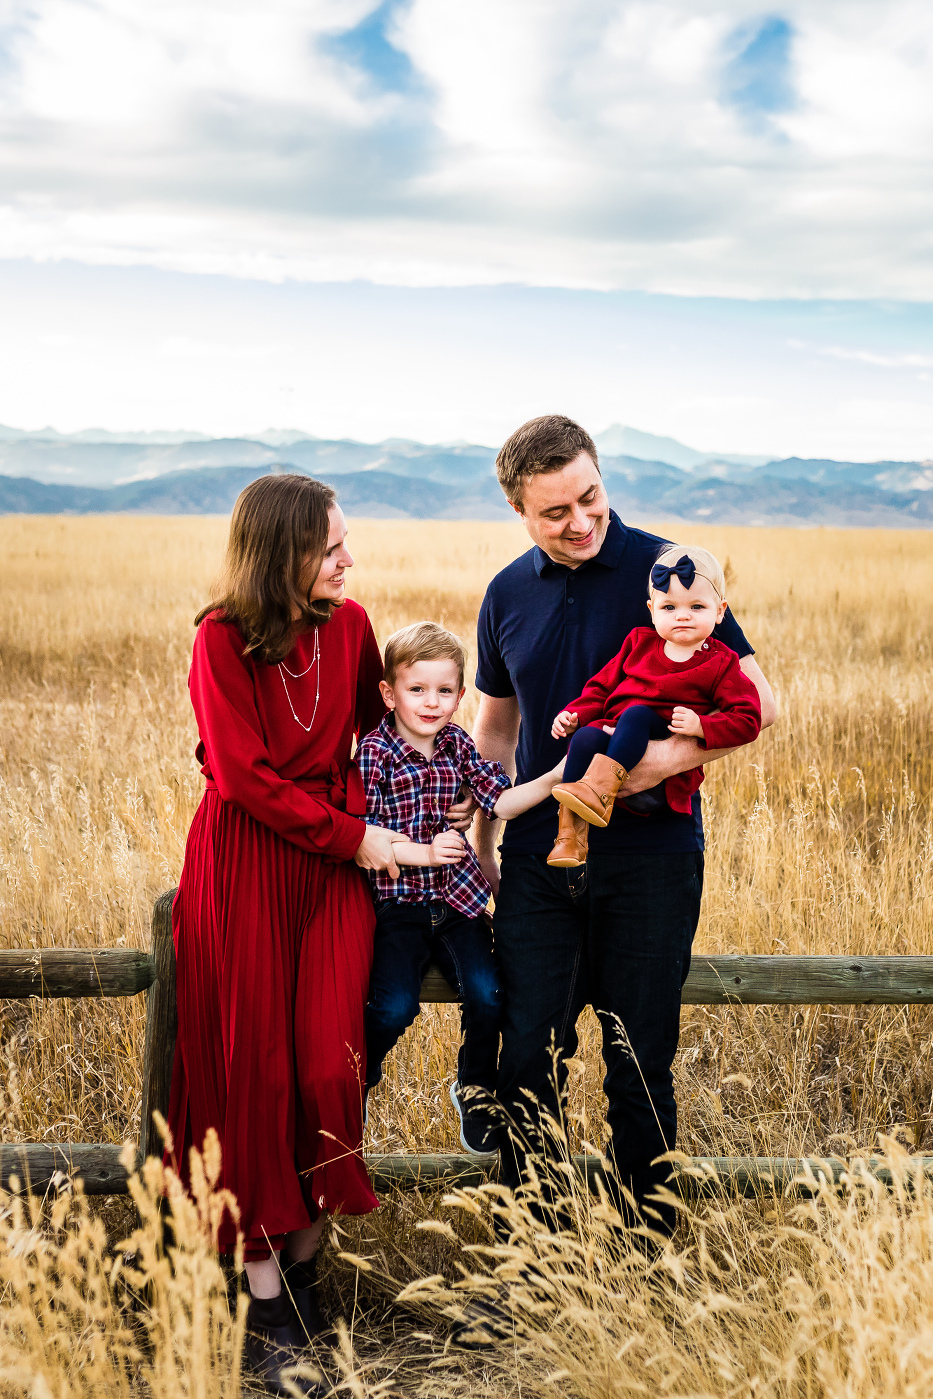 How to Choose the Best Time for Family Portraits